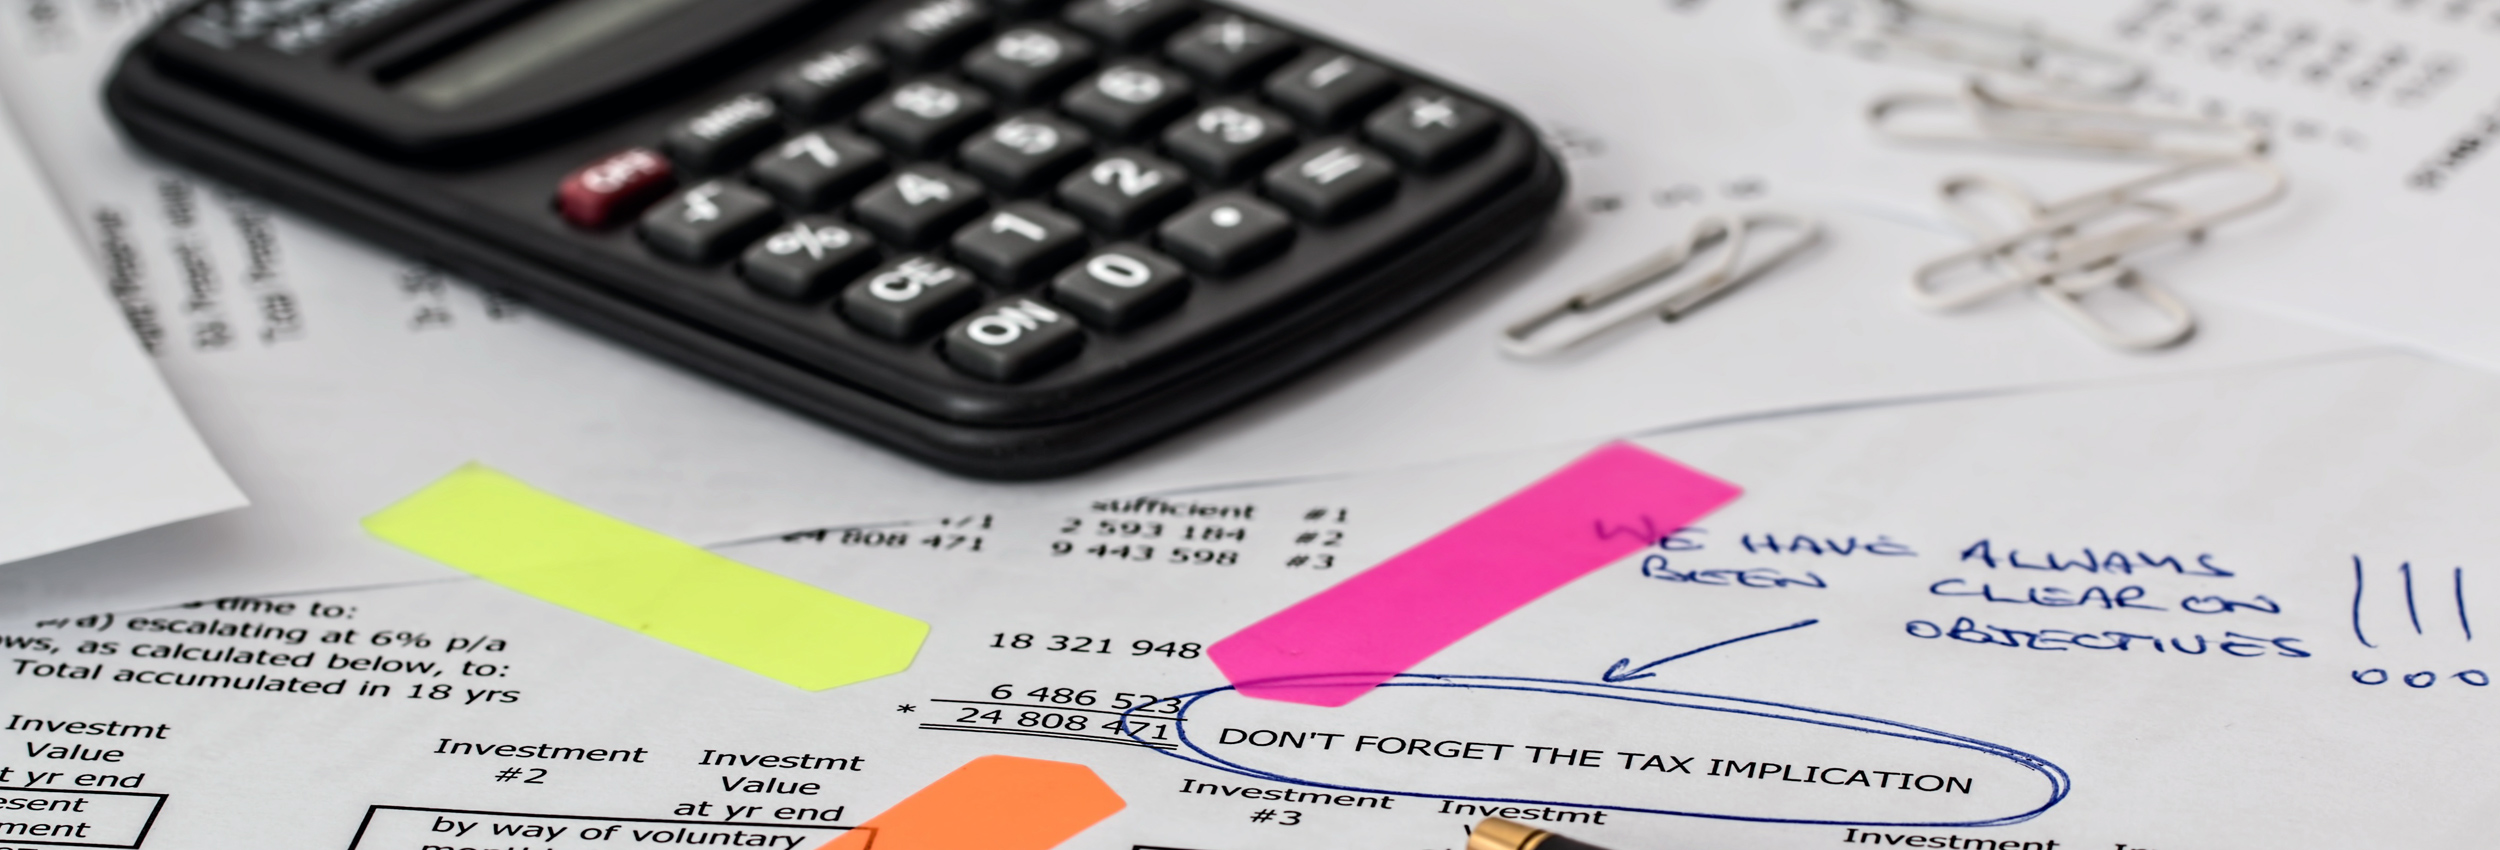 Accounts and Bookkeeping from CMH Accountancy Ltd, Haywards Heath, West Sussex